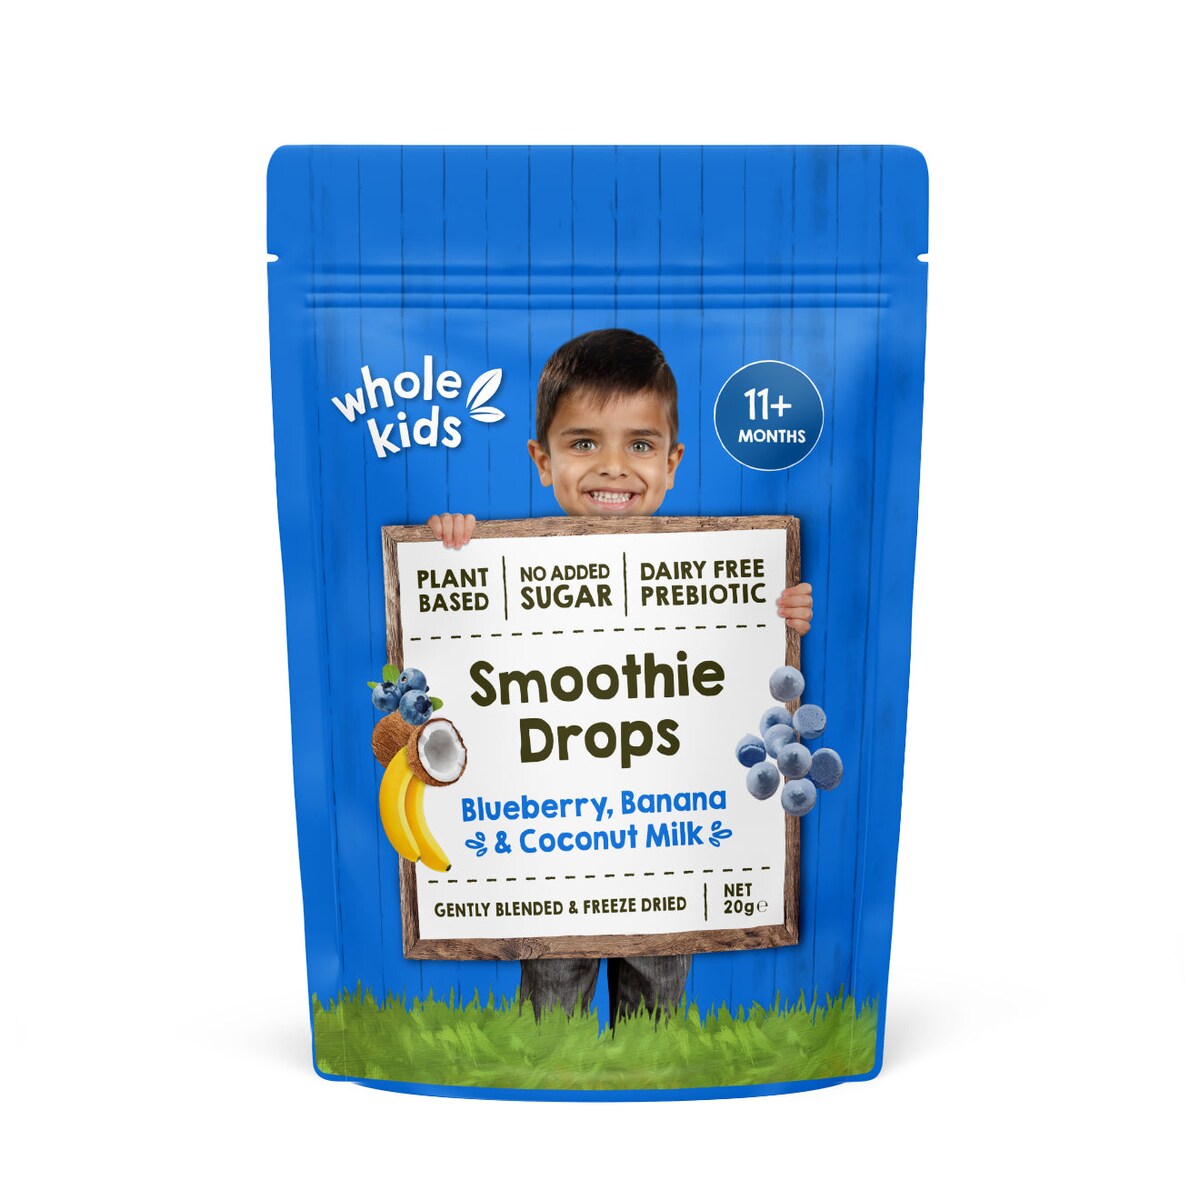 Whole Kids Smoothie Drops Blueberry Banana & Coconut Milk 20g